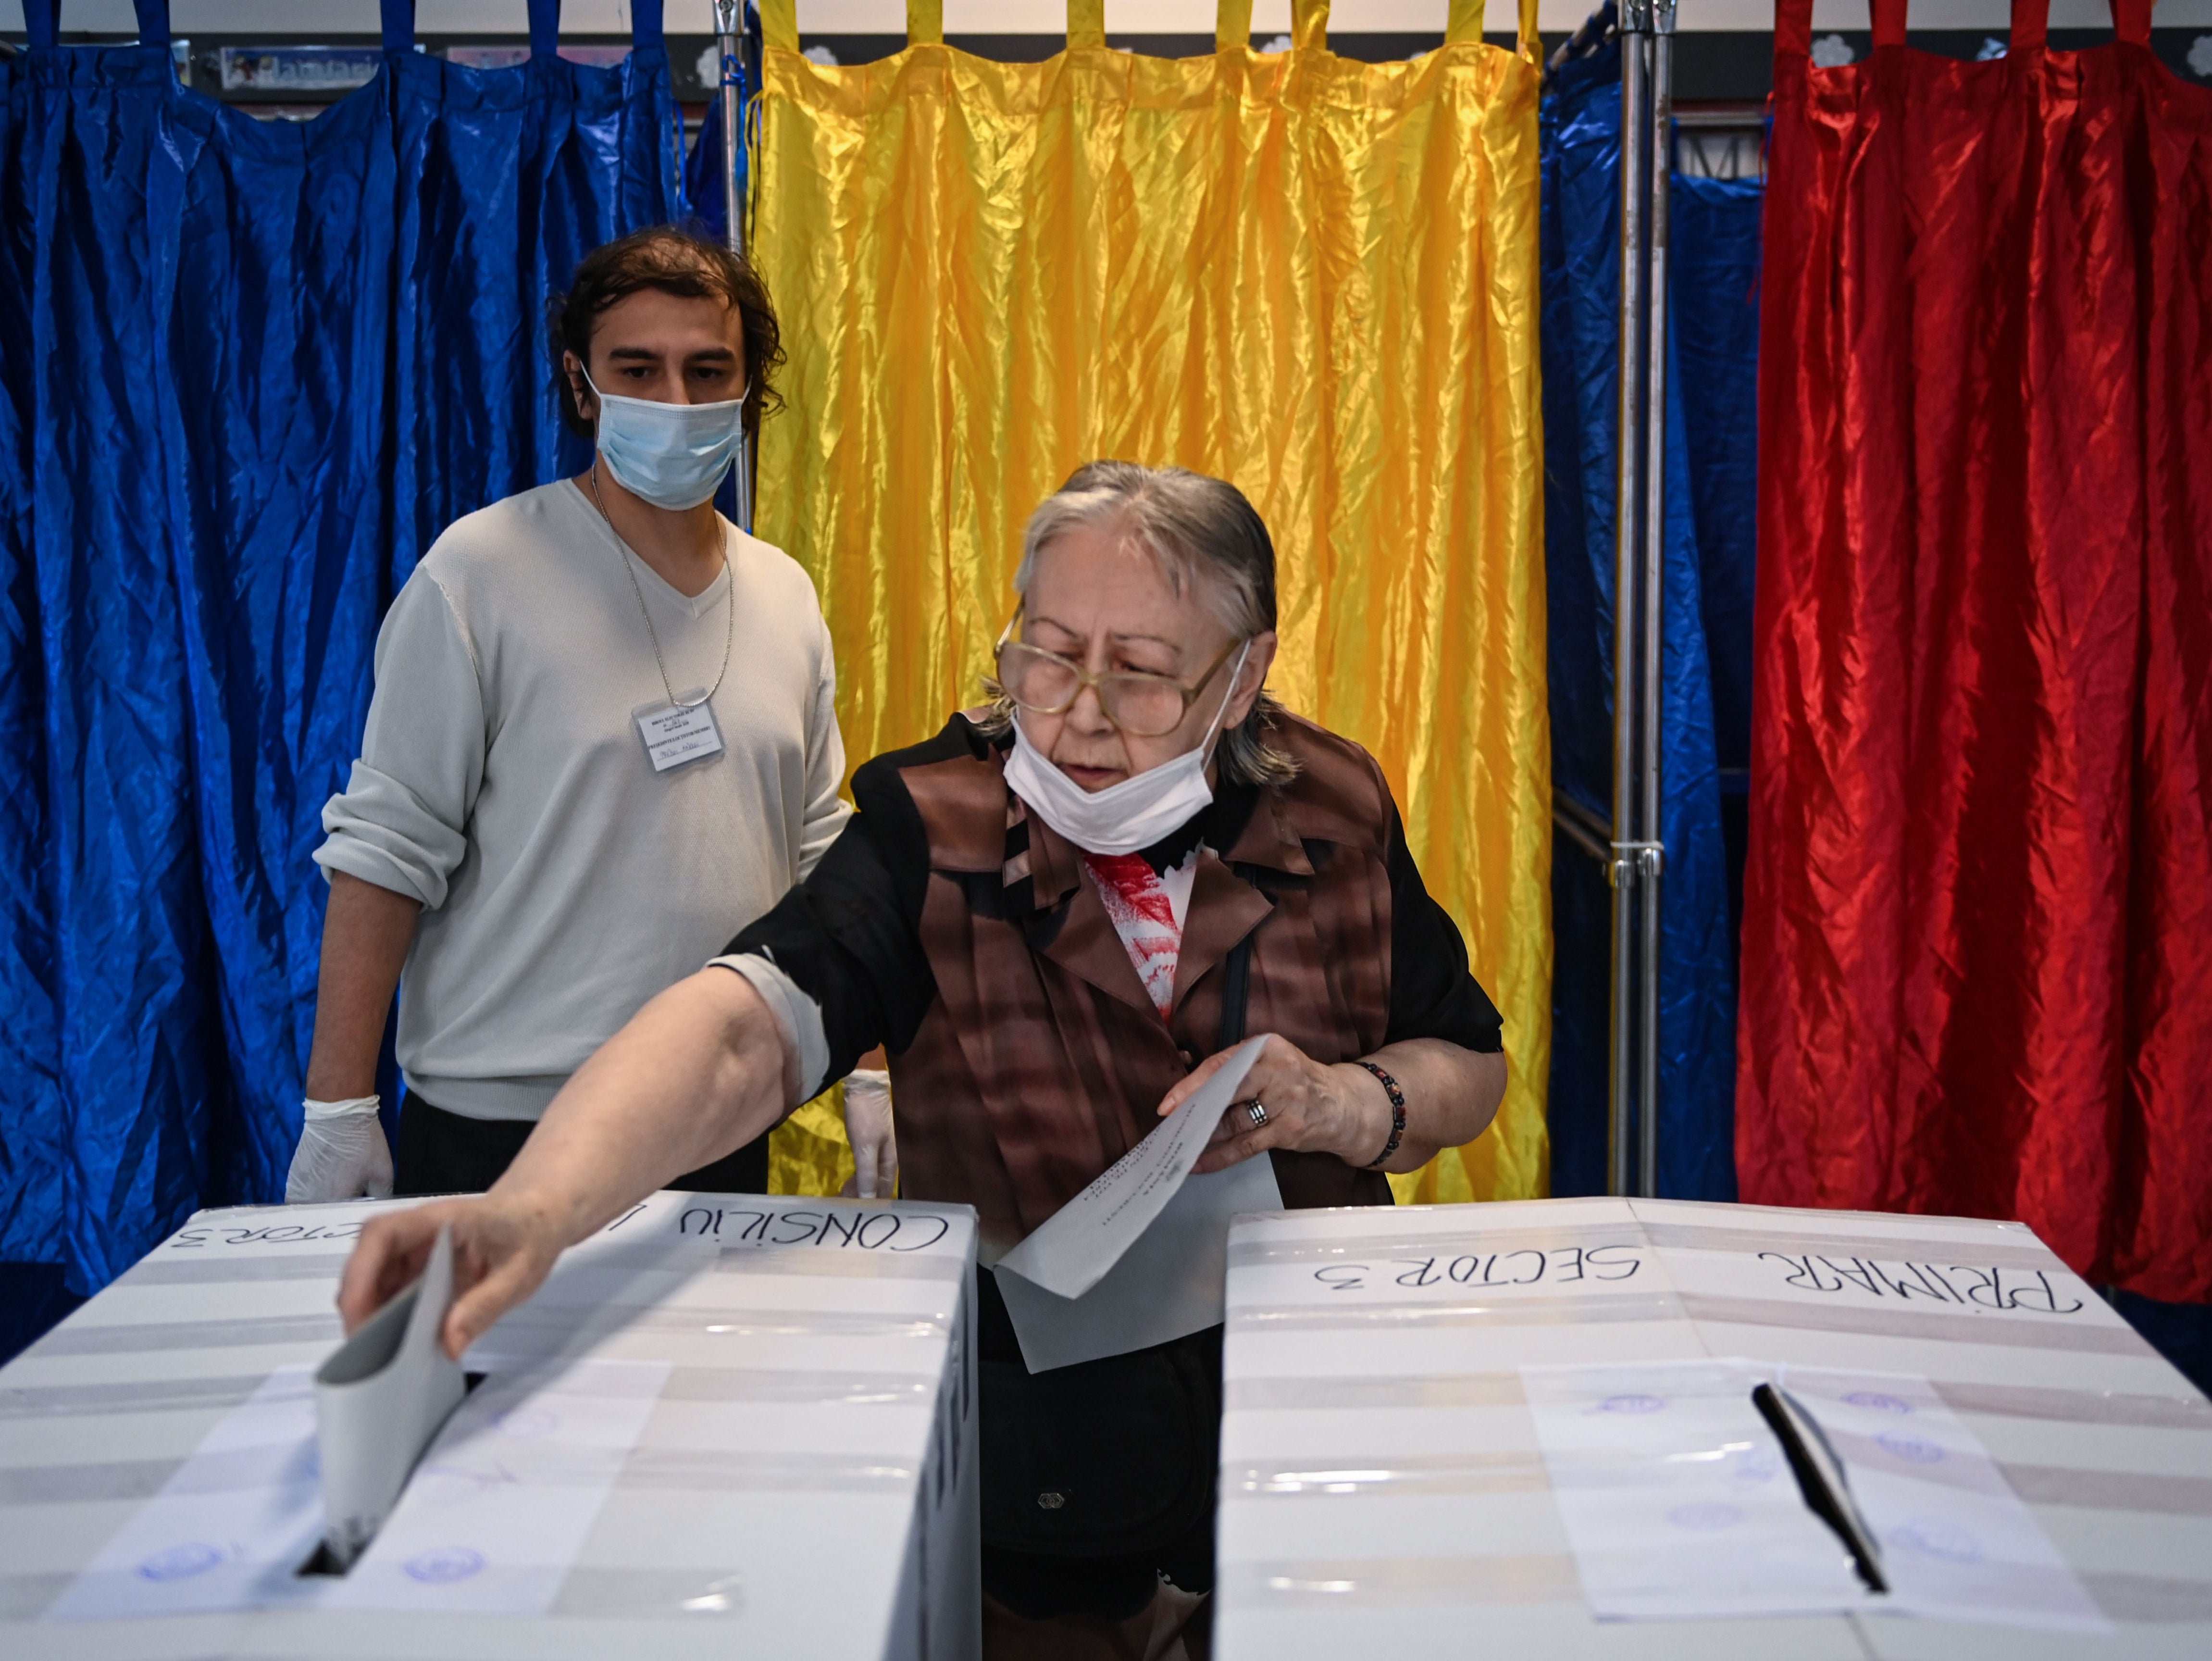 A voter casts a ballot at a polling station in Bucharest on Sunday